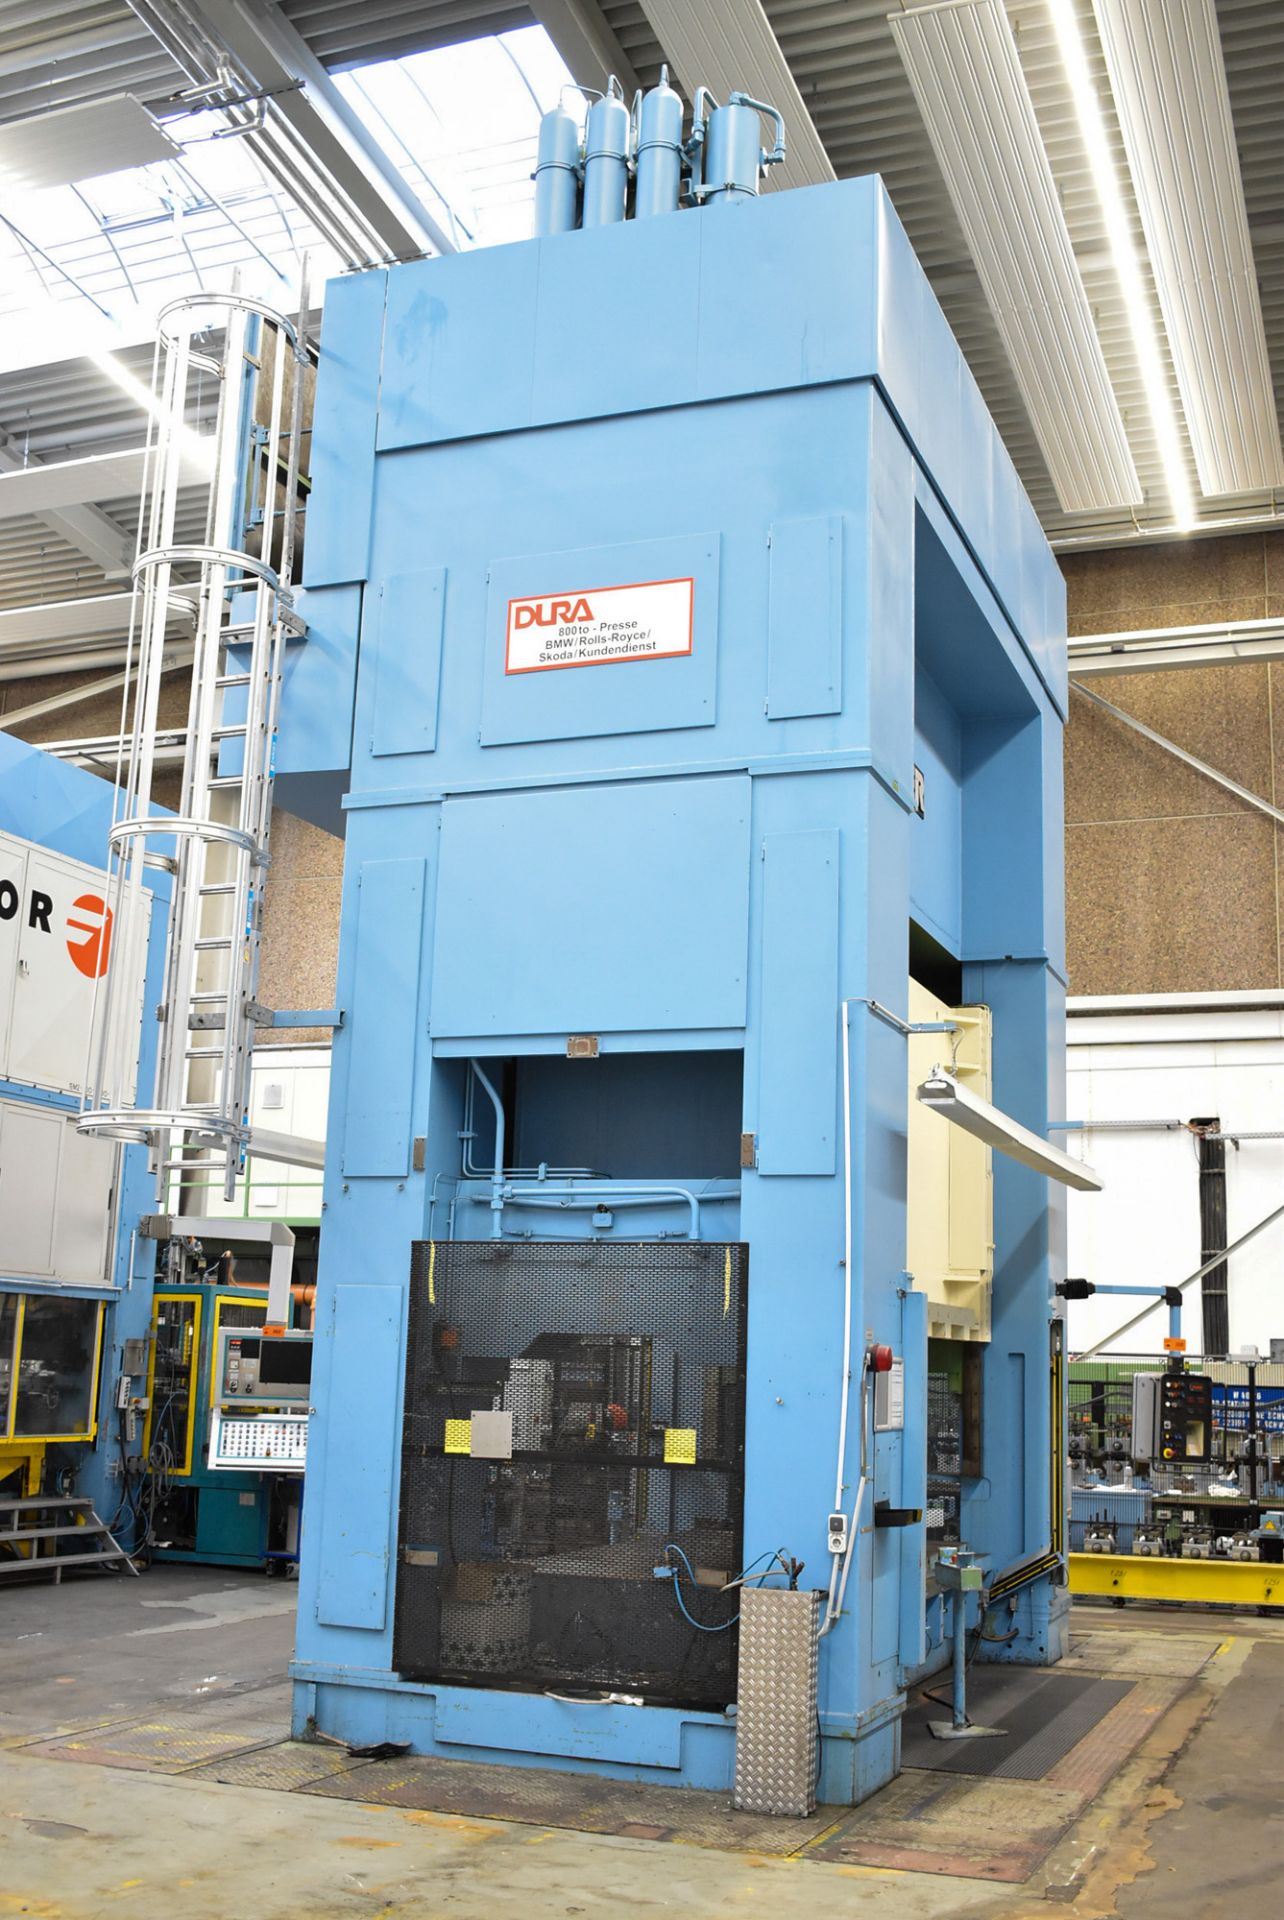 LAUFER (1990) RZUN 800 STRAIGHT SIDE DOWN ACTING HYDRAULIC PRESS WITH 800 TON CAPACITY, SIEMENS - Image 3 of 14